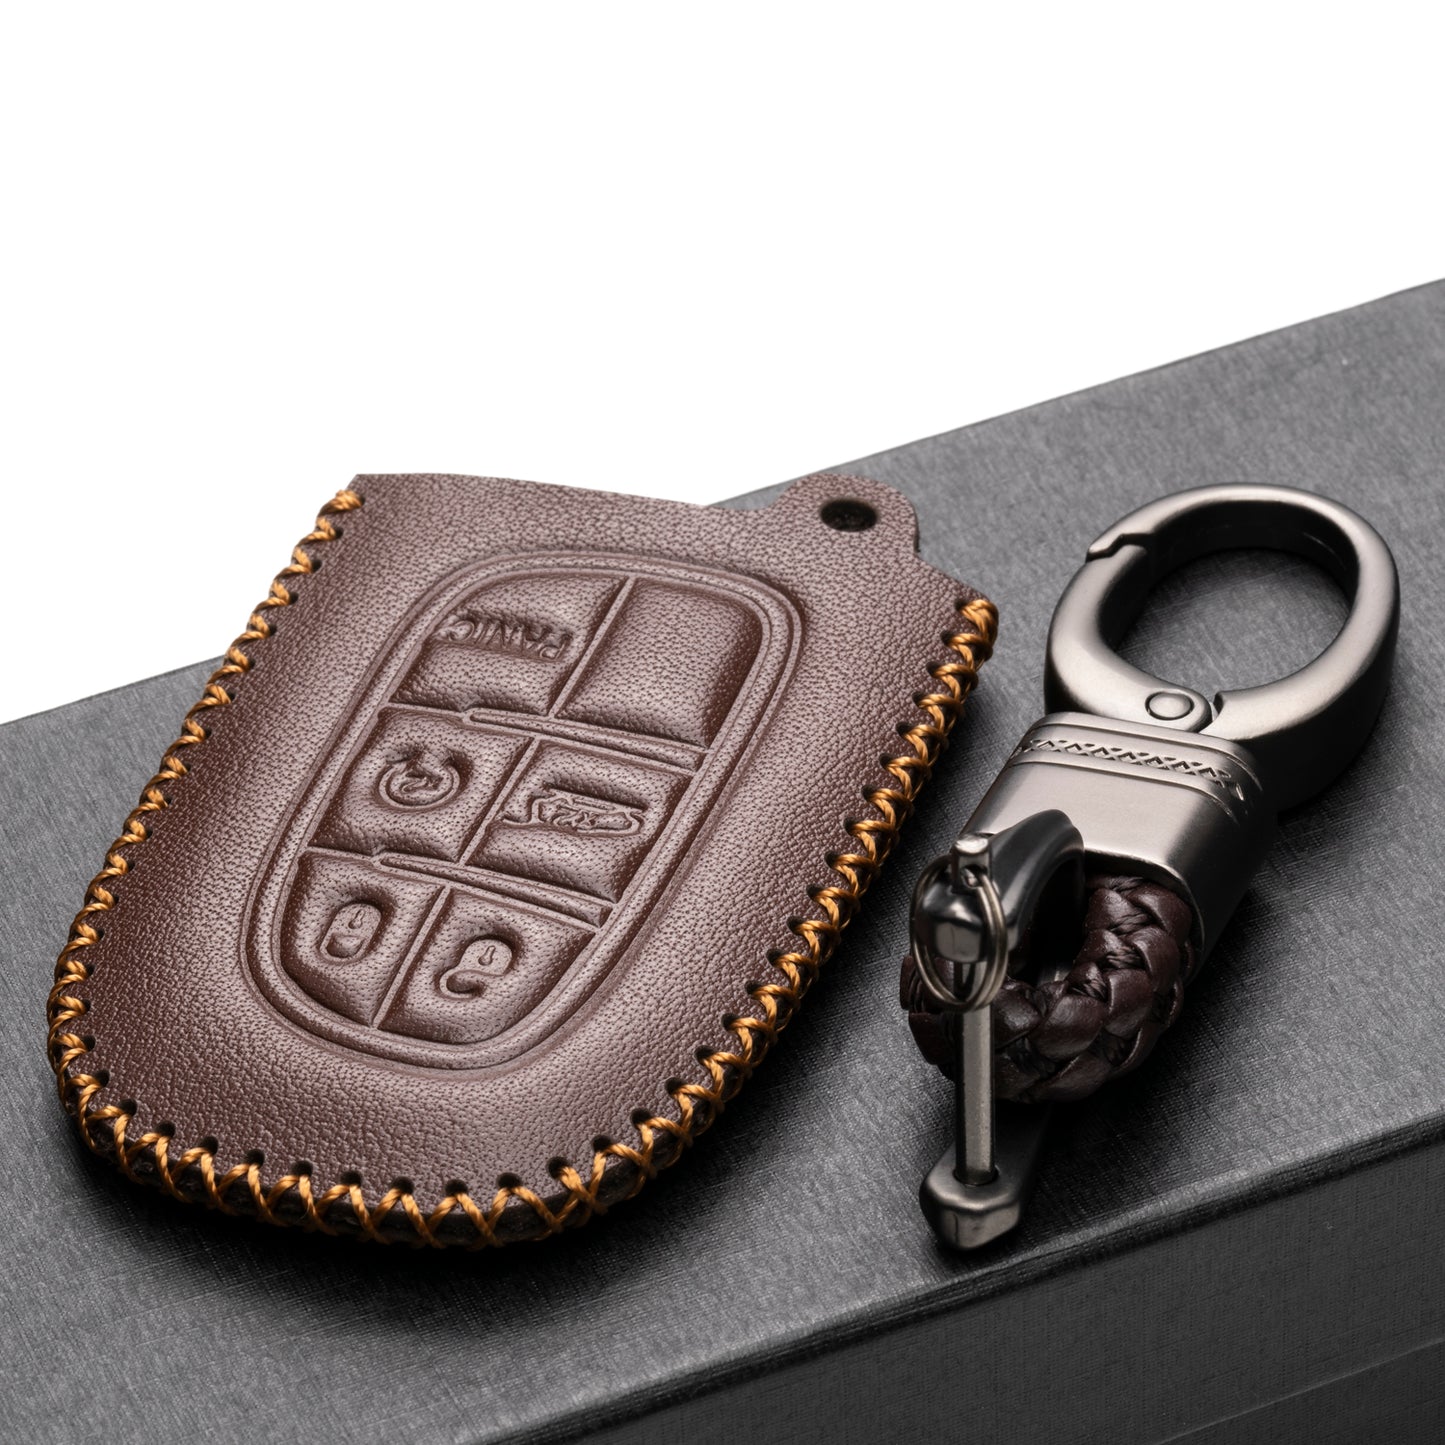 Vitodeco 5-Button Genuine Leather Smart Key Fob Case Cover Protector for 2014-2018 Jeep Cherokee, 2013-2017 Ram 1500, 2500, 3500